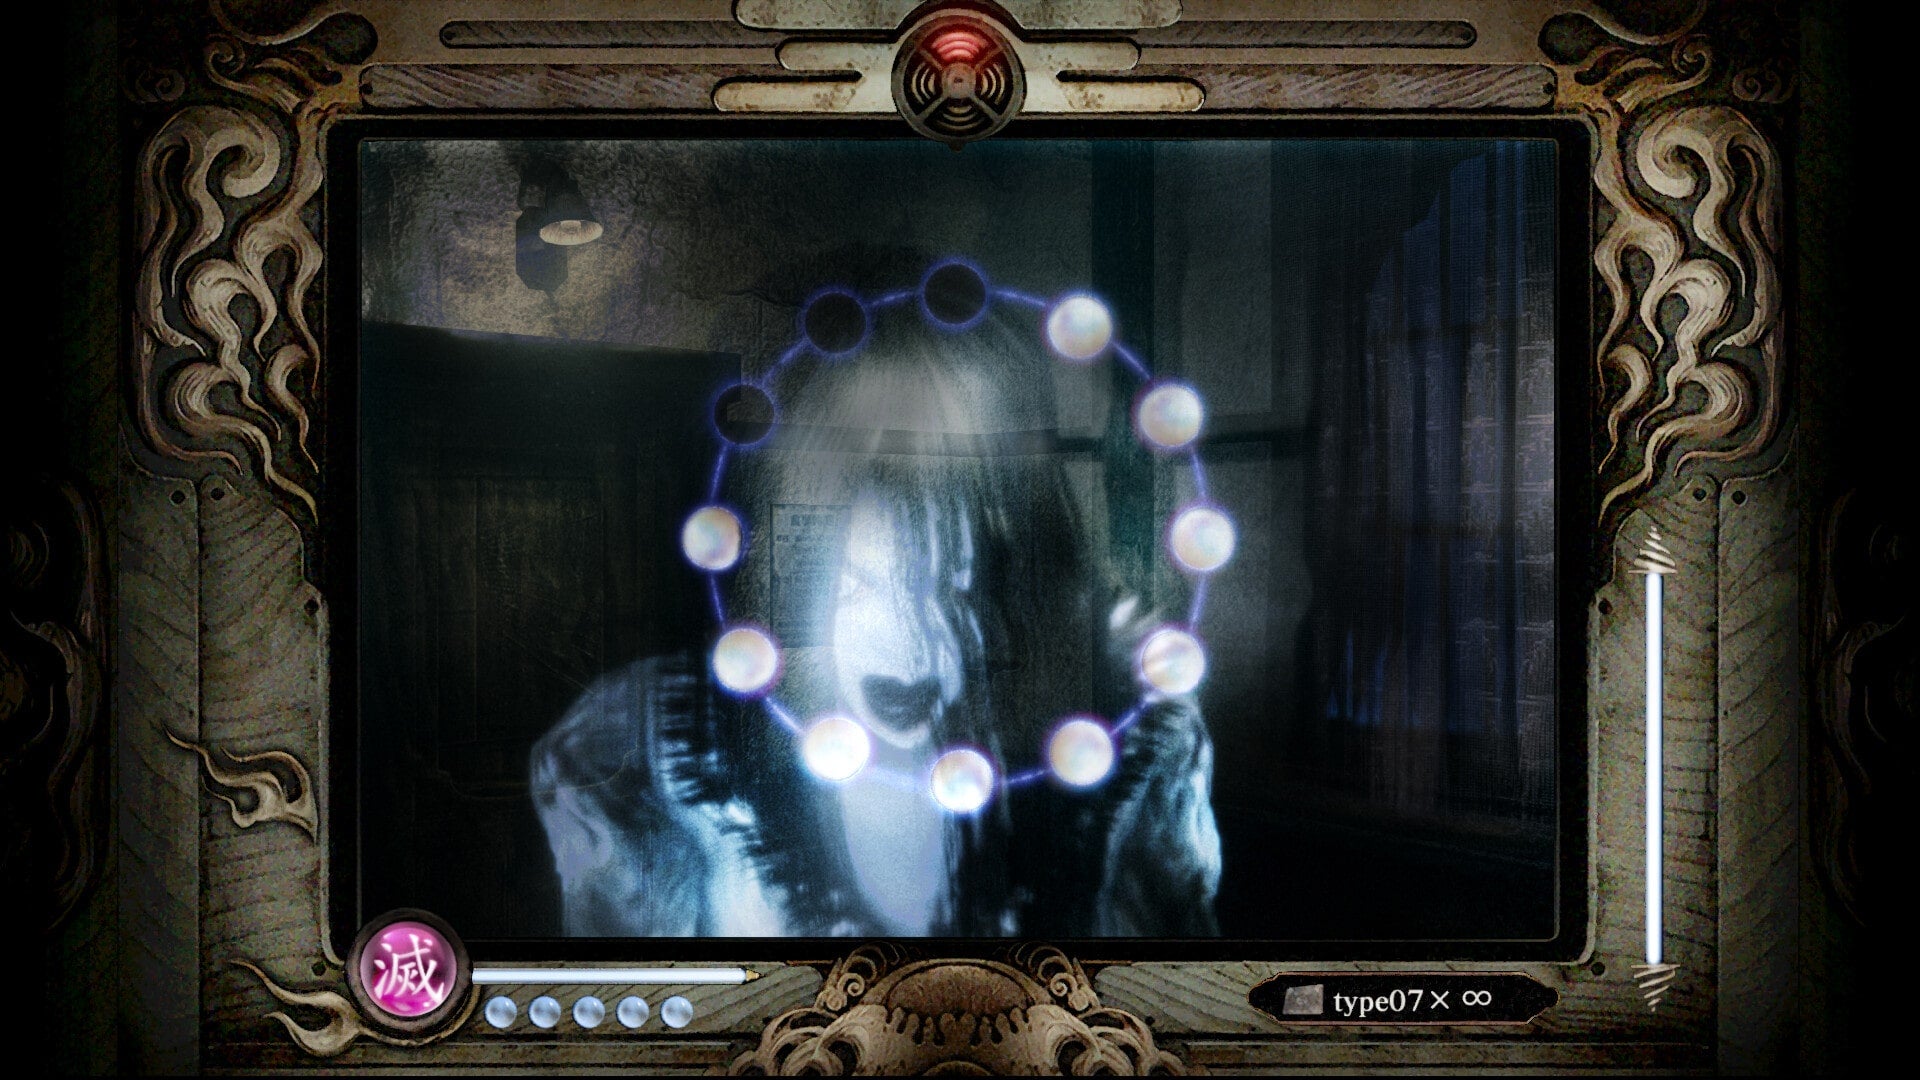 A not-quite fatal frame. (Image: Koei Tecmo)